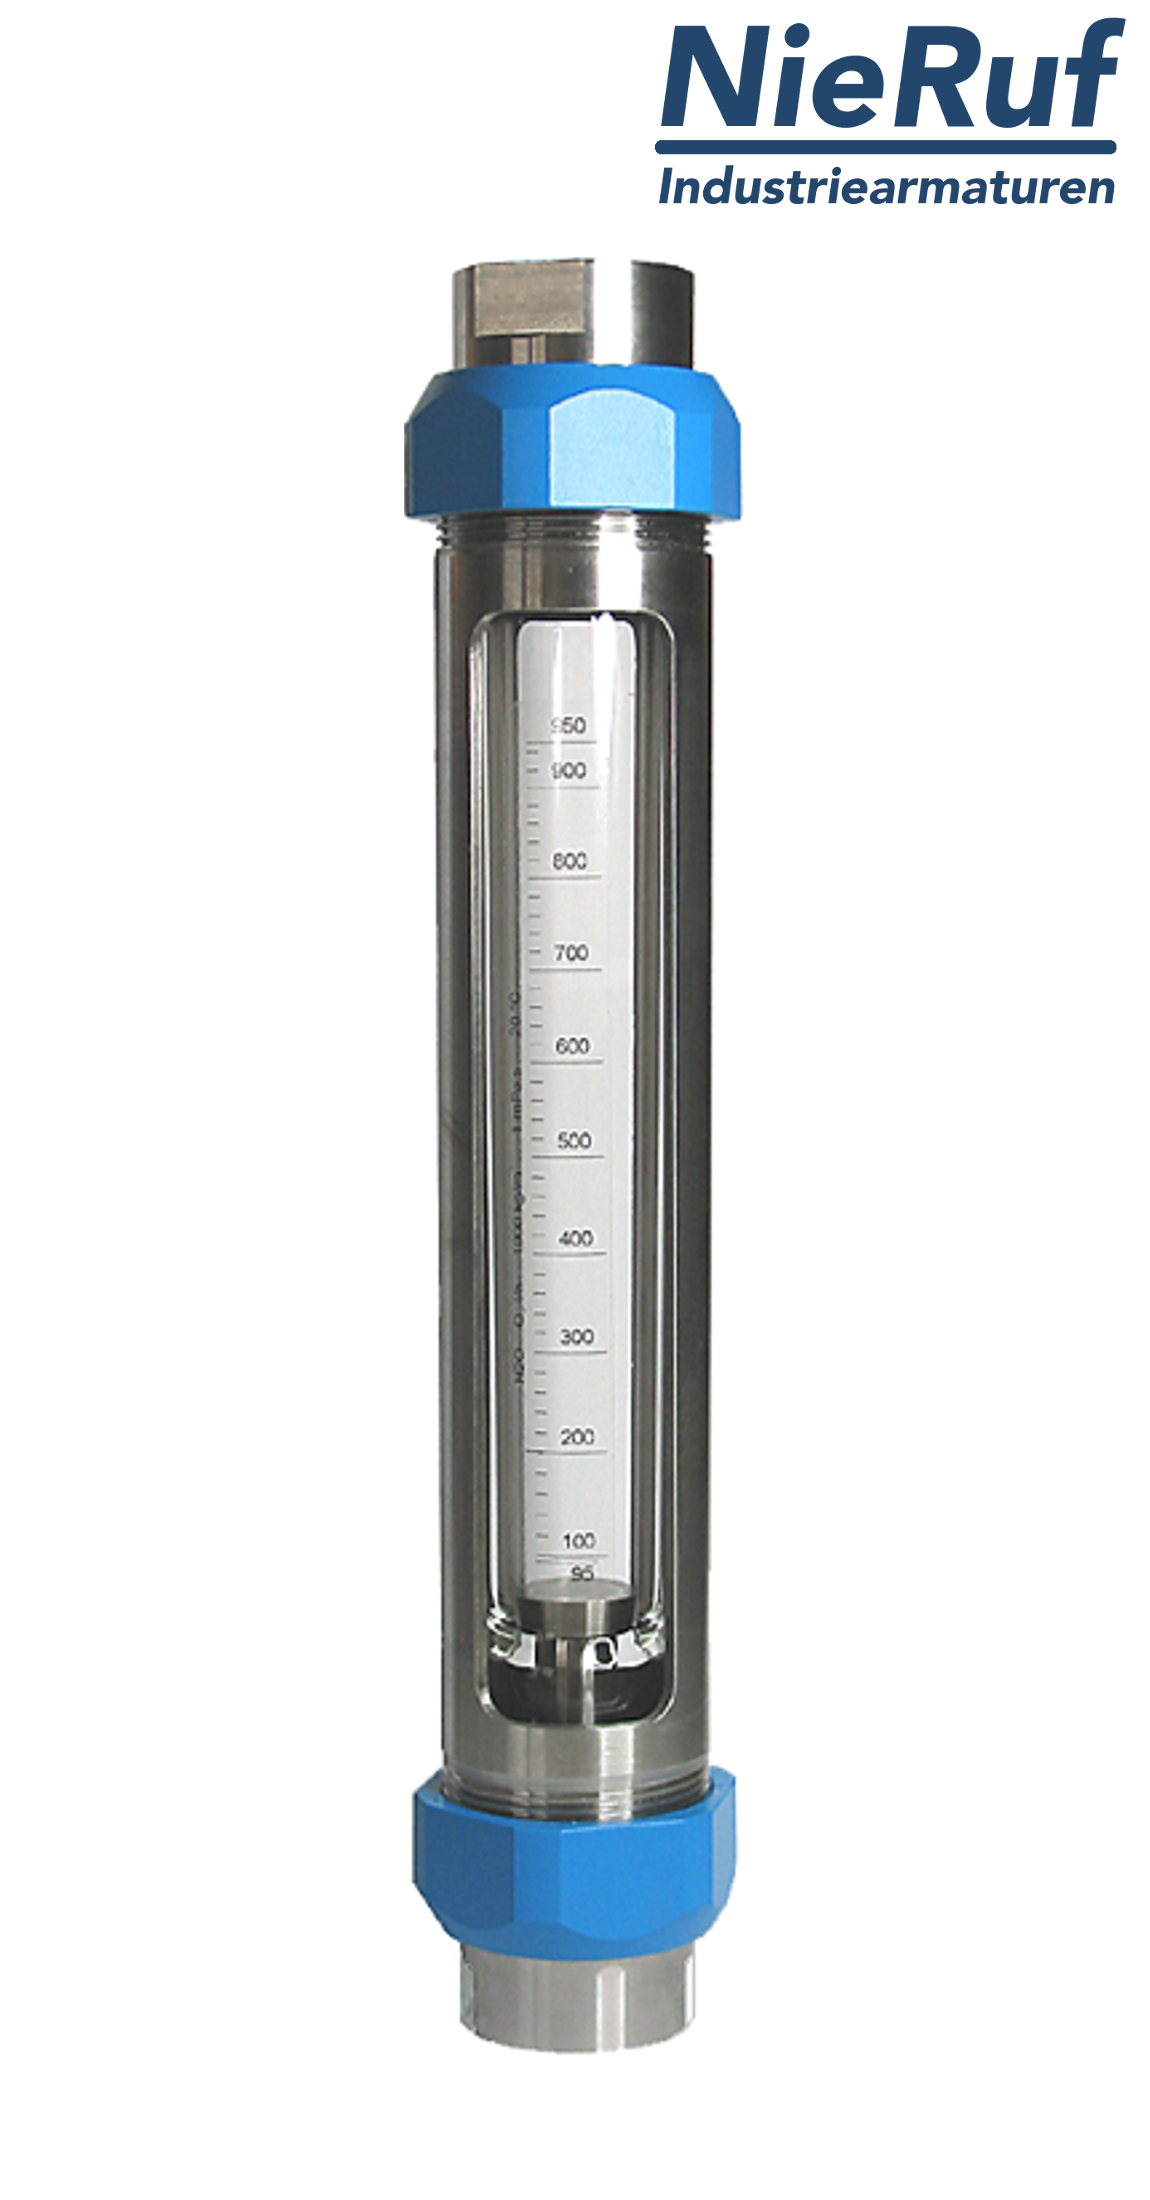 Variable area flowmeter stainless steel + borosilicate 1/2" inch 4.0 - 40.0 l/h water FKM